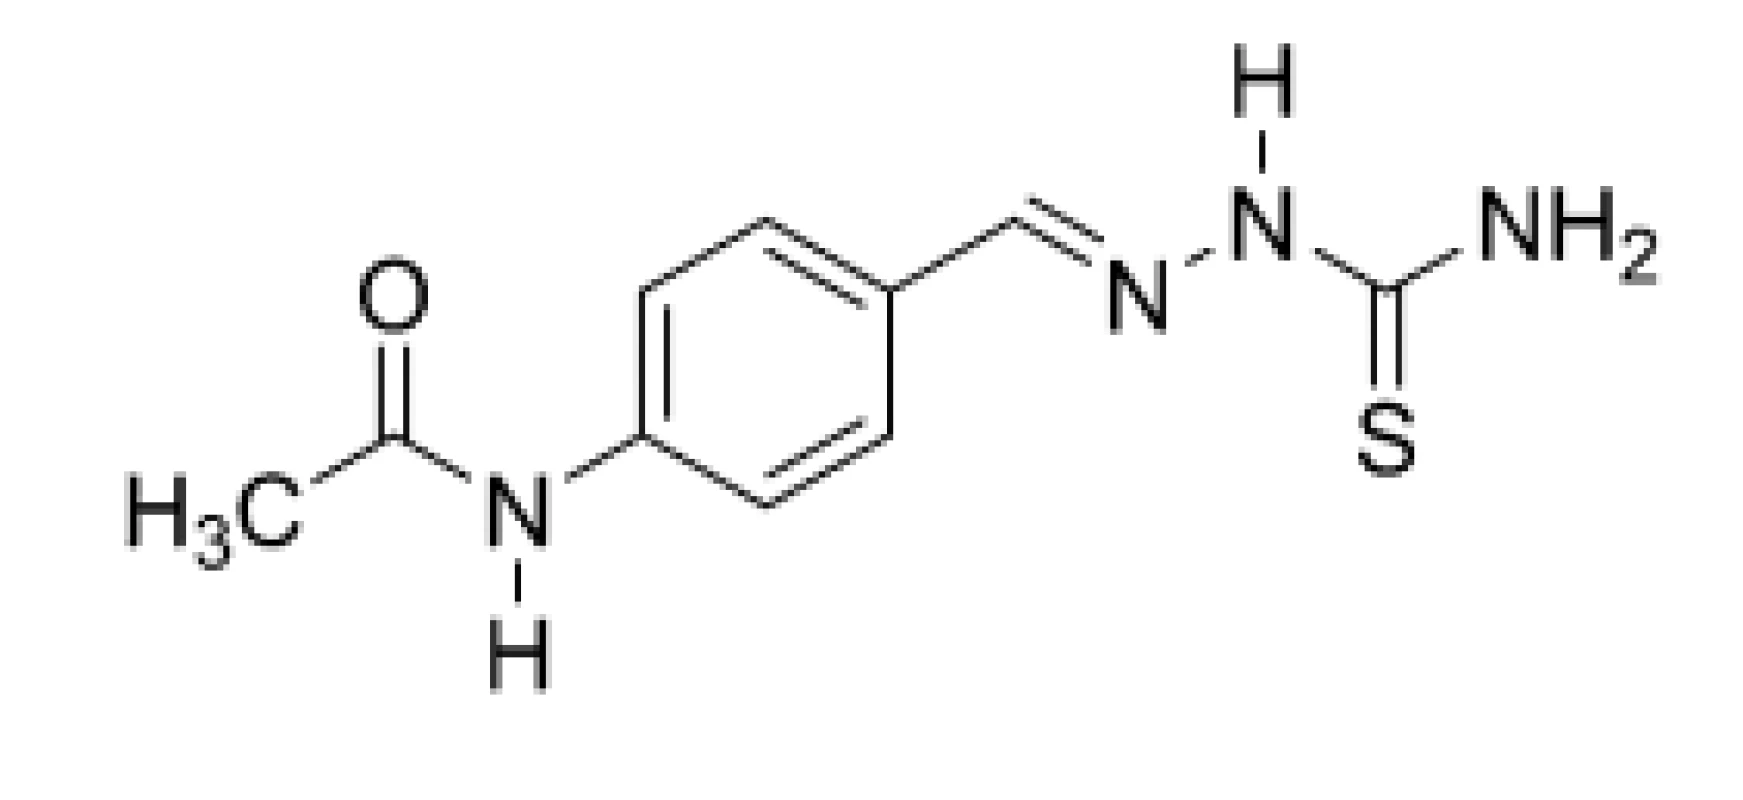 Chemical structure of thiacetazone (TAZ; 10)